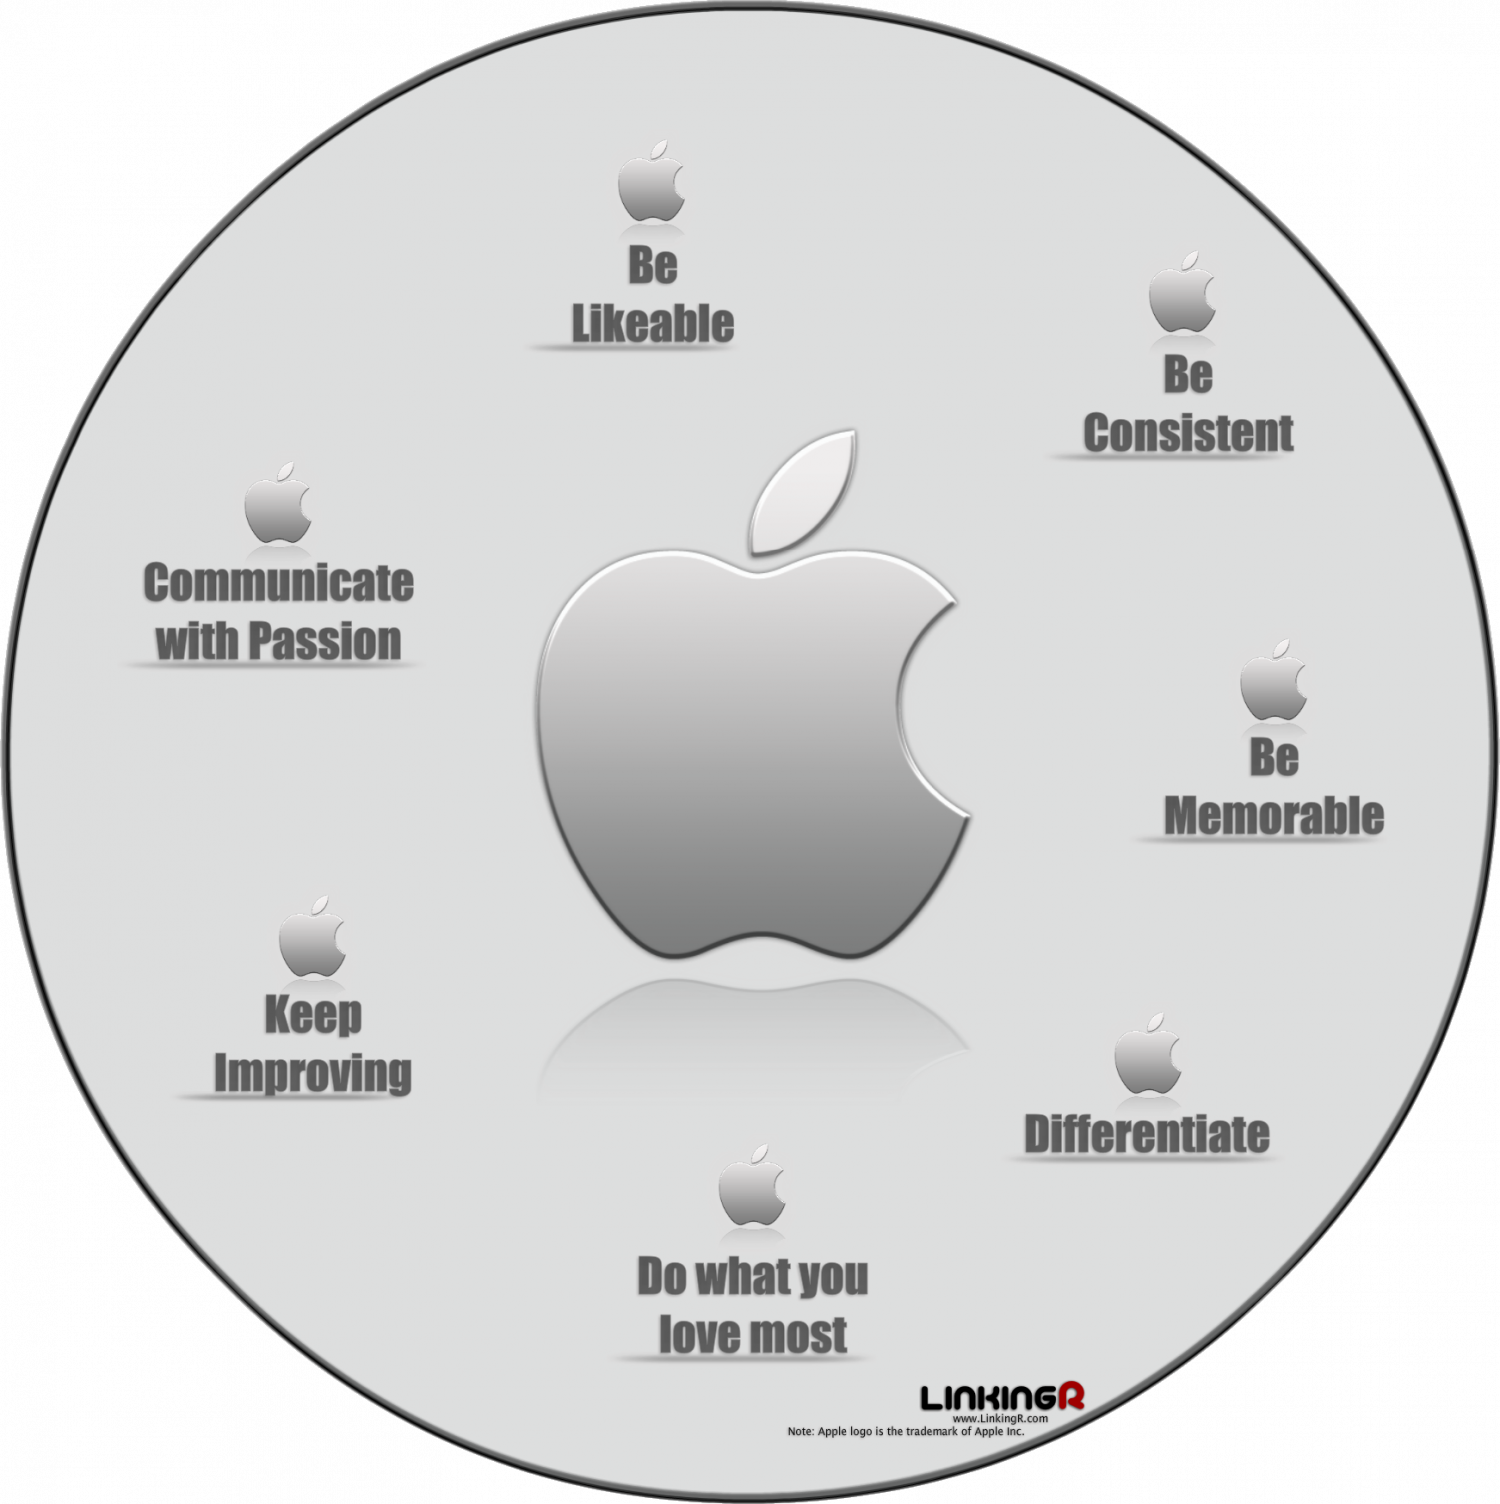 7 Personal Branding Tips from Apple Infographic